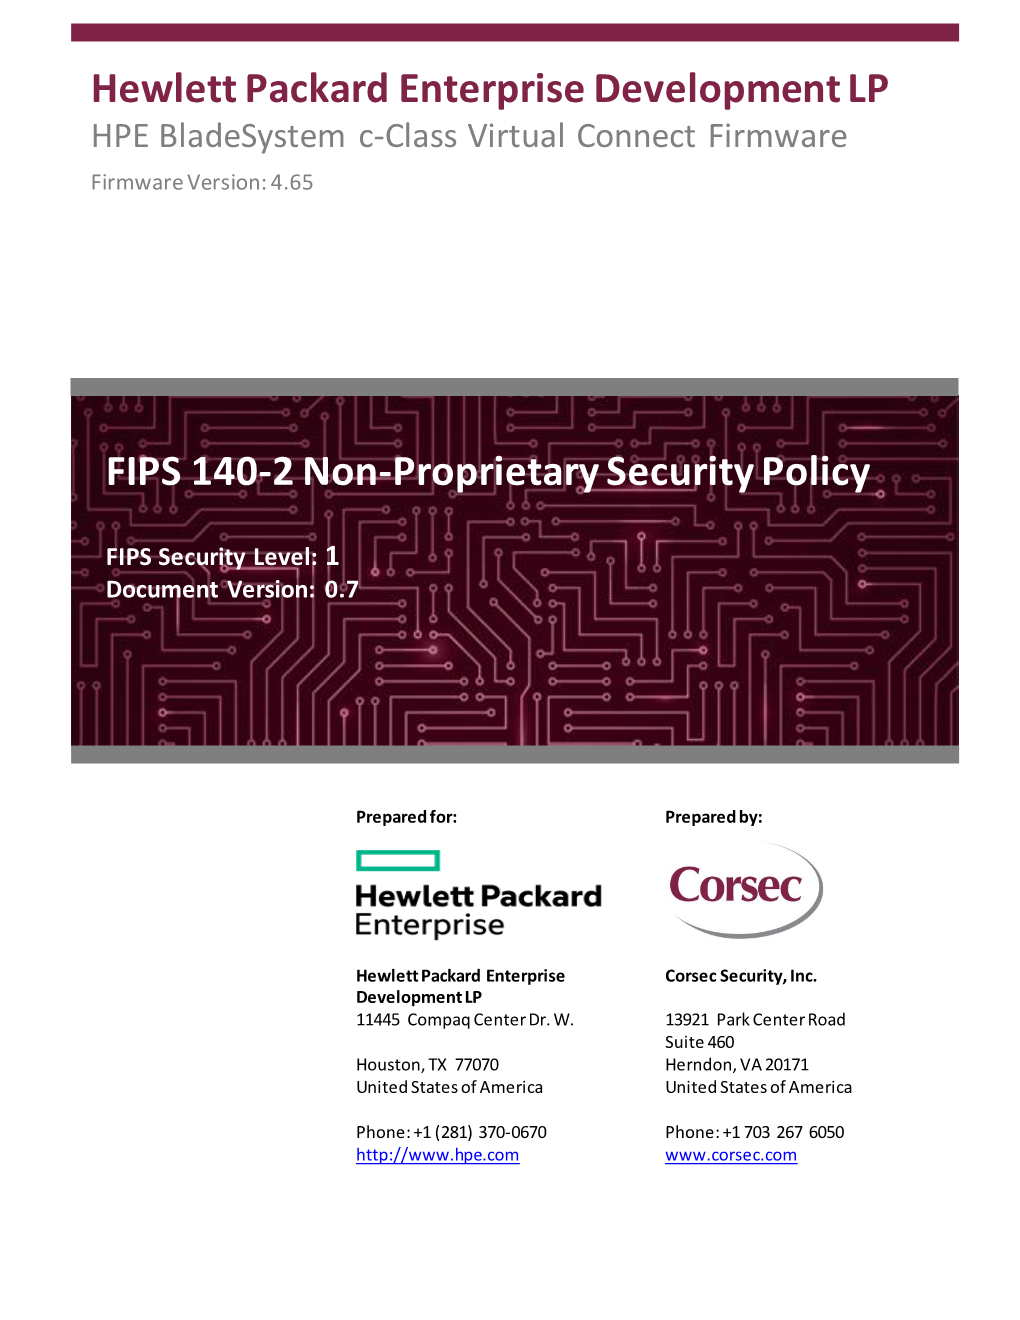 FIPS 140-2 Non-Proprietary Security Policy